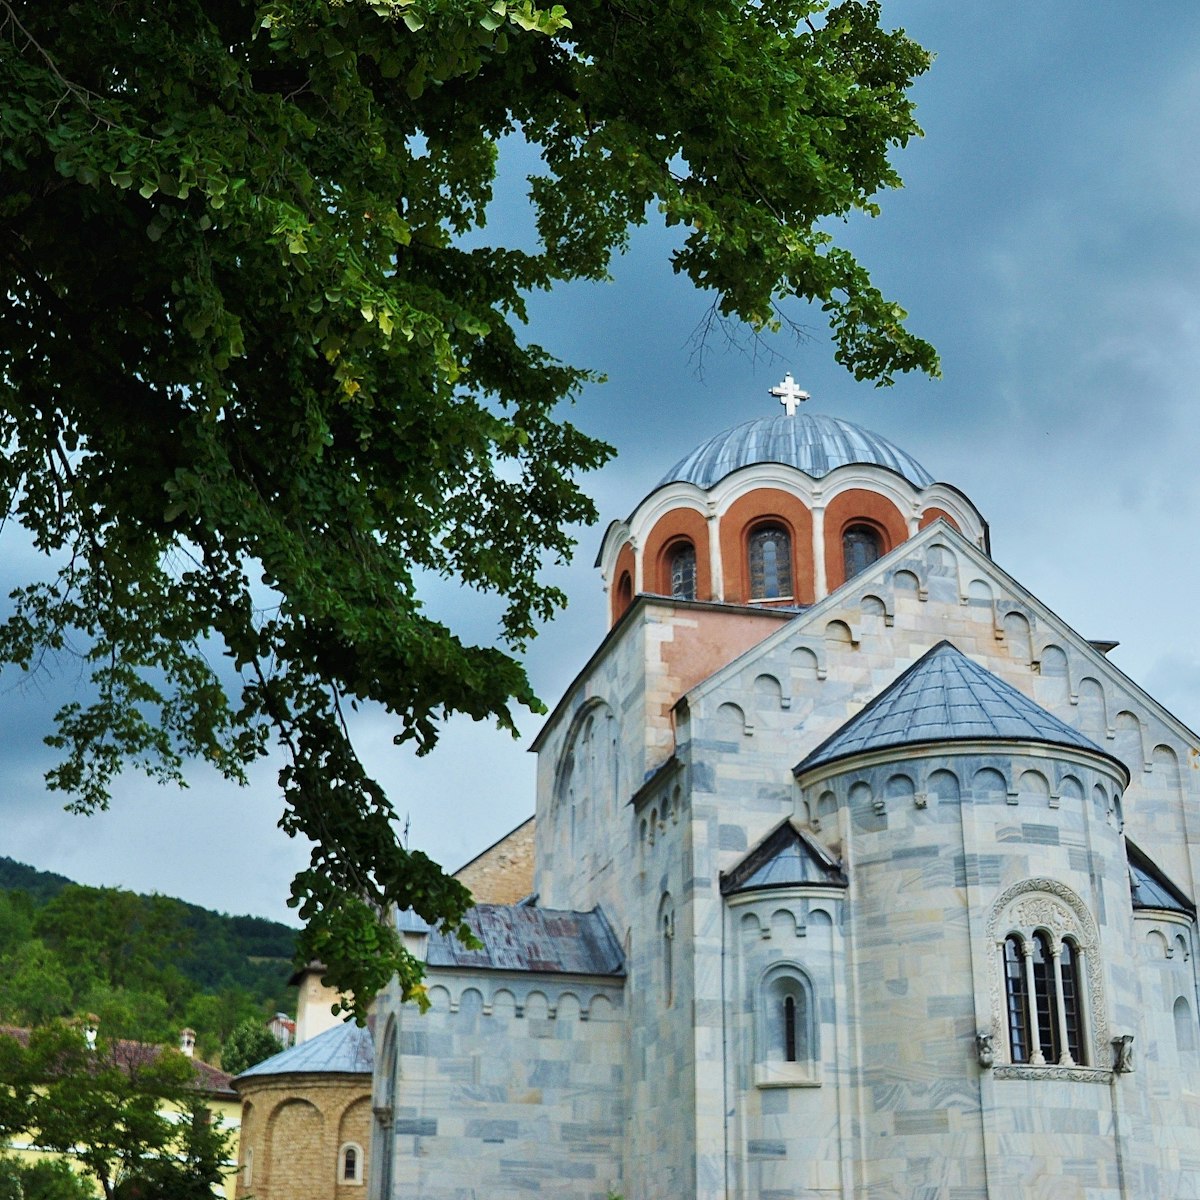 Studenica Monastery, Kraljevo, Serbia ; Shutterstock ID 631705469; Your name (First / Last): Brana V; GL account no.: 65050; Netsuite department name: Online Editorial; Full Product or Project name including edition: Serbia destination pages